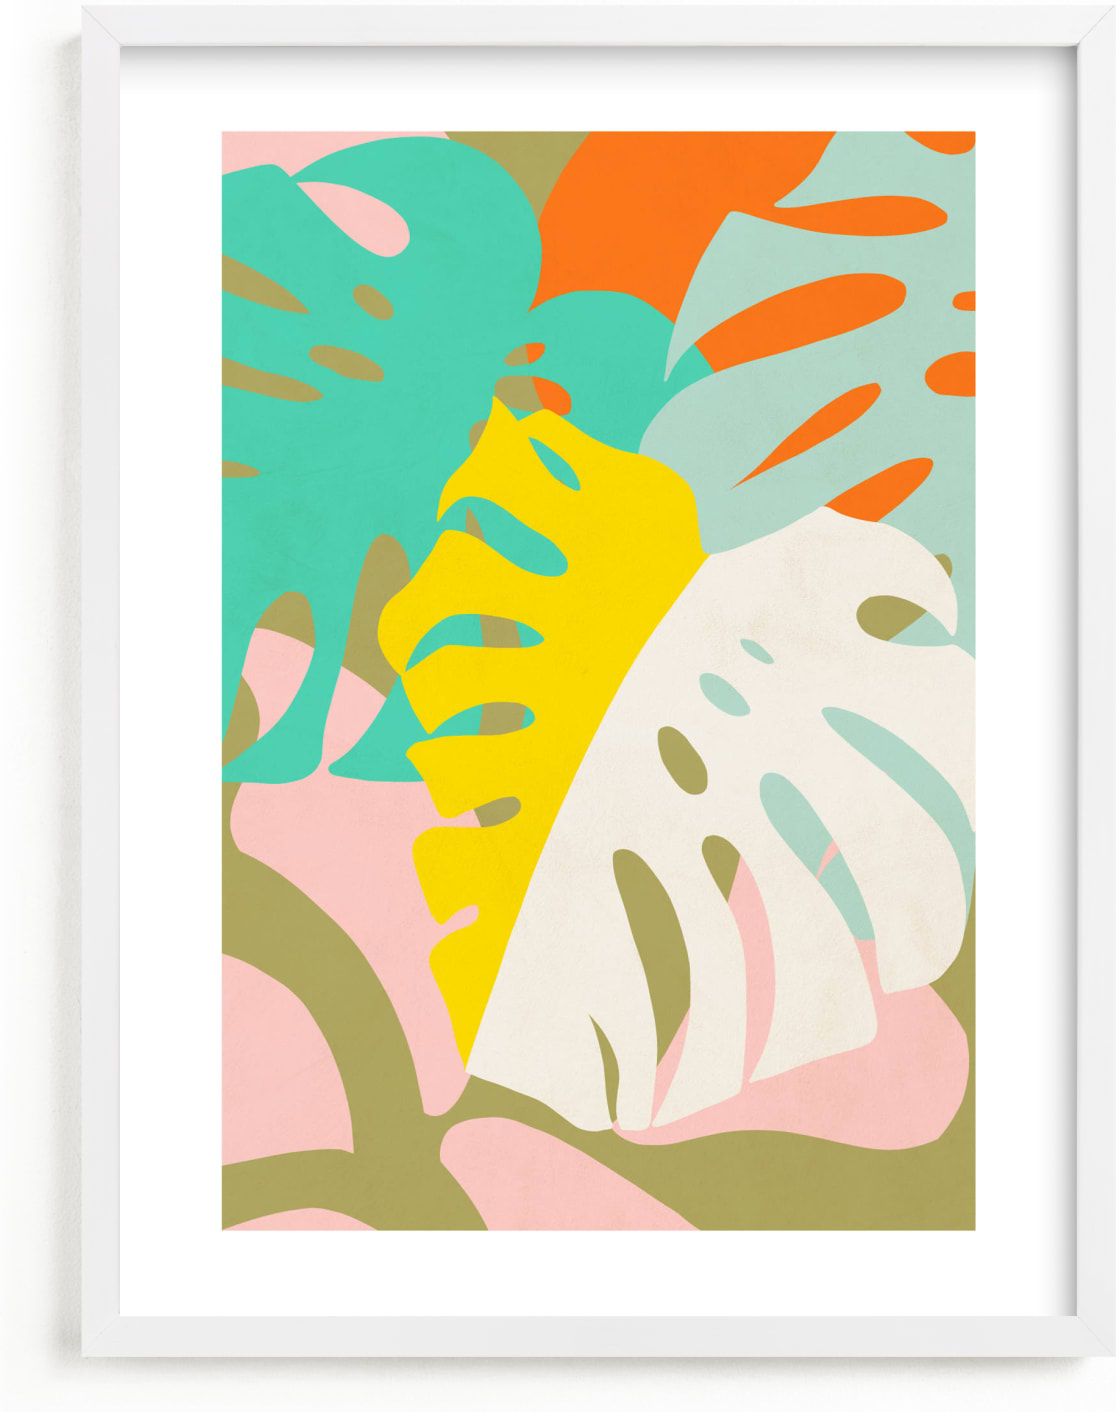 This is a colorful kids wall art by Dominique Vari called Tropical Vibes.